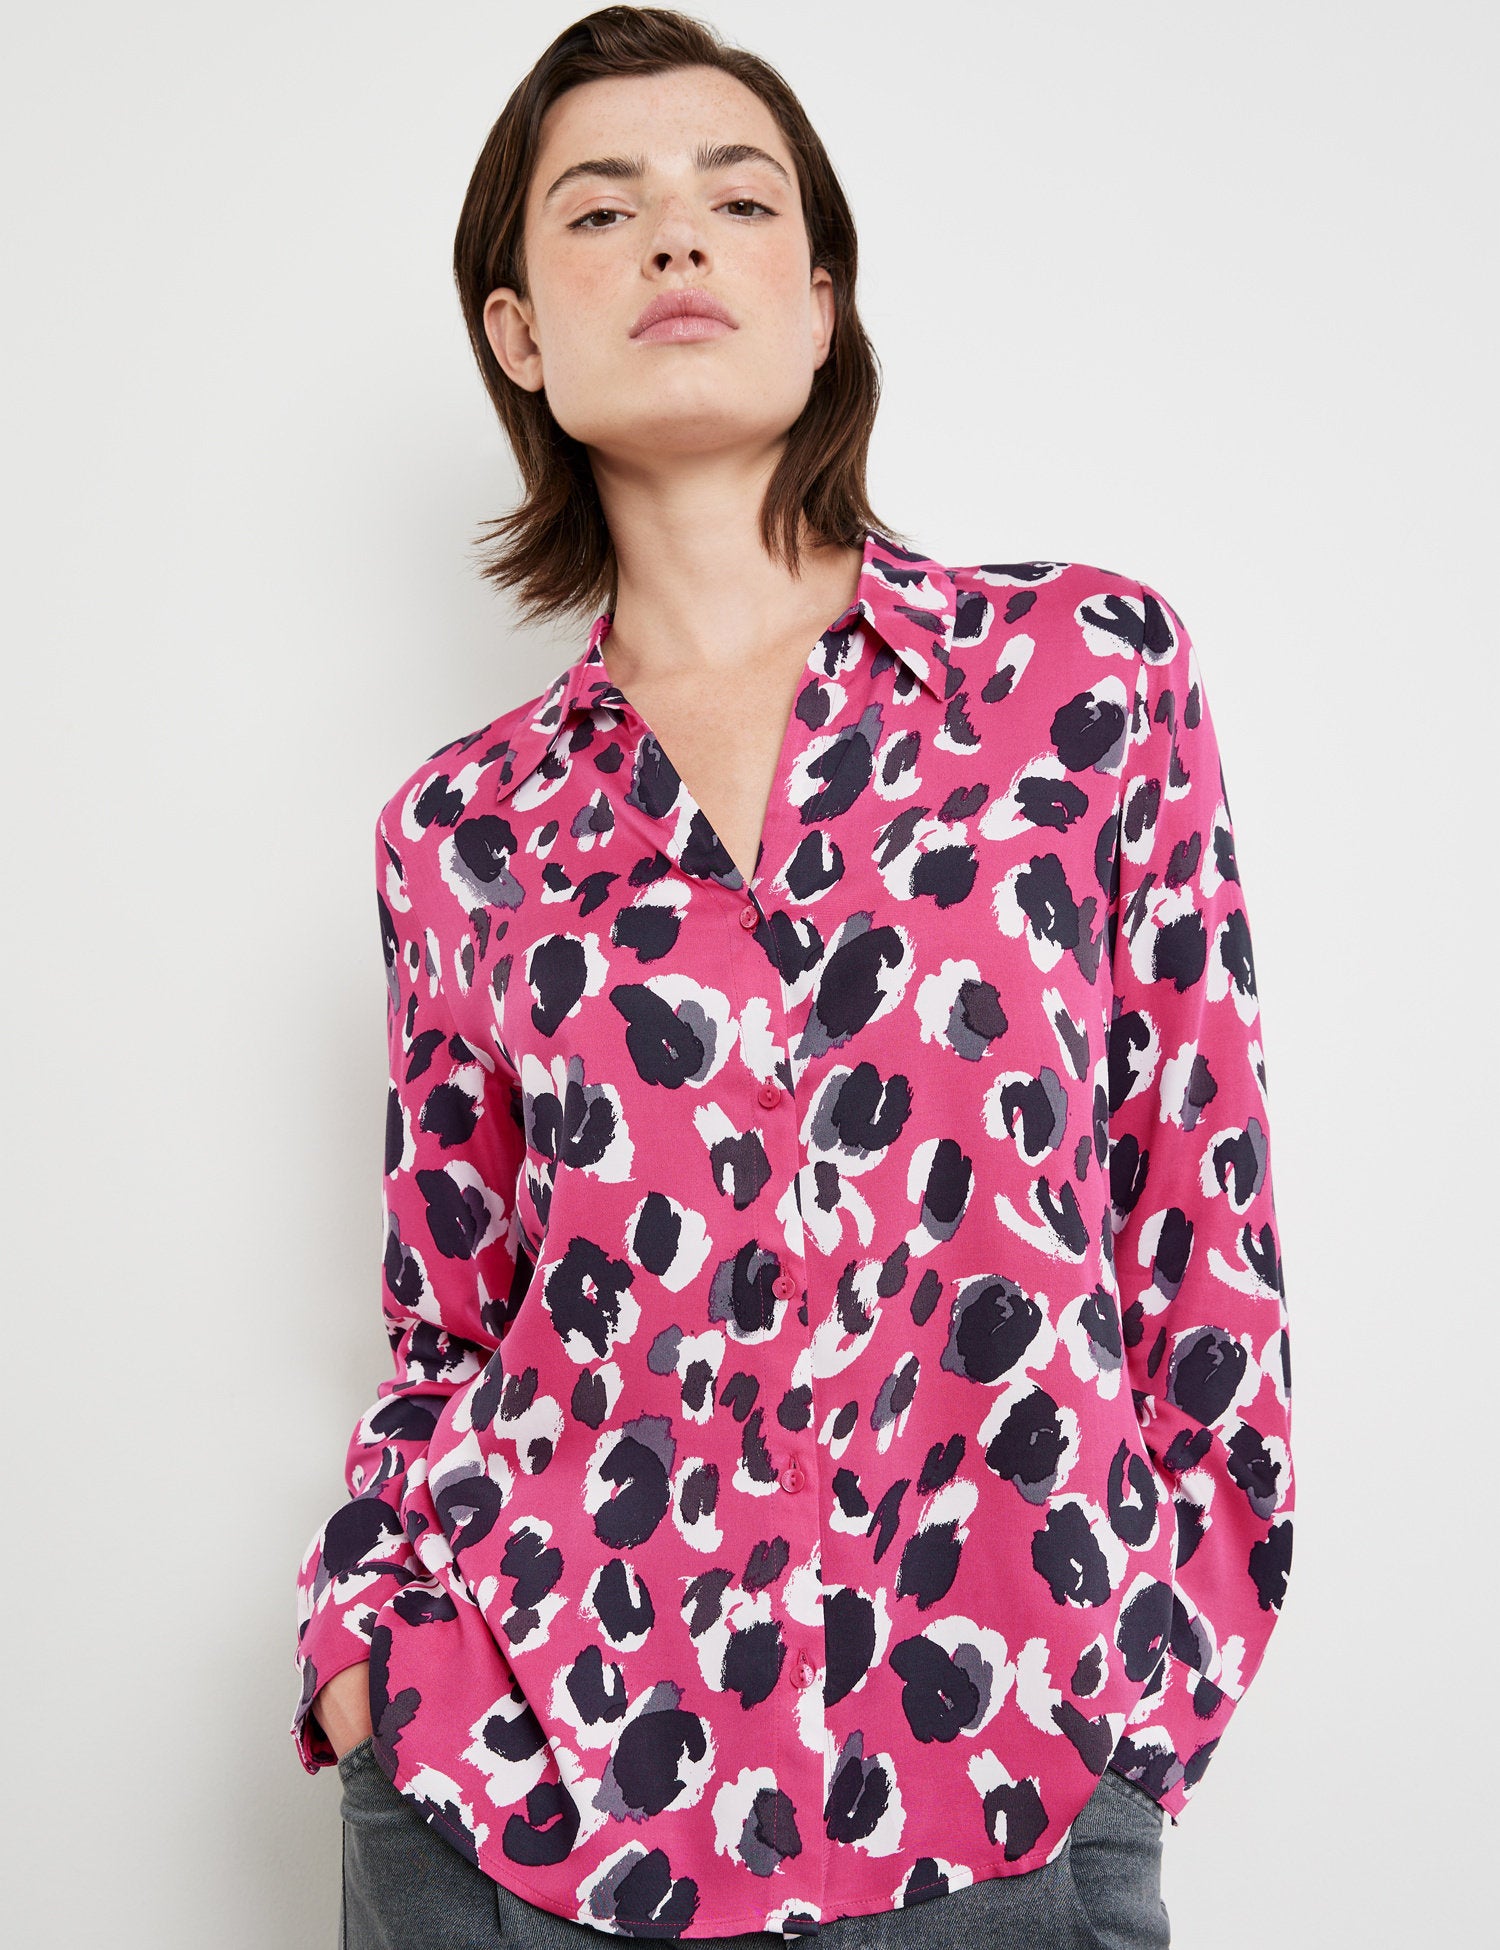 Blouse With An Animal Print_460420-11210_3402_01